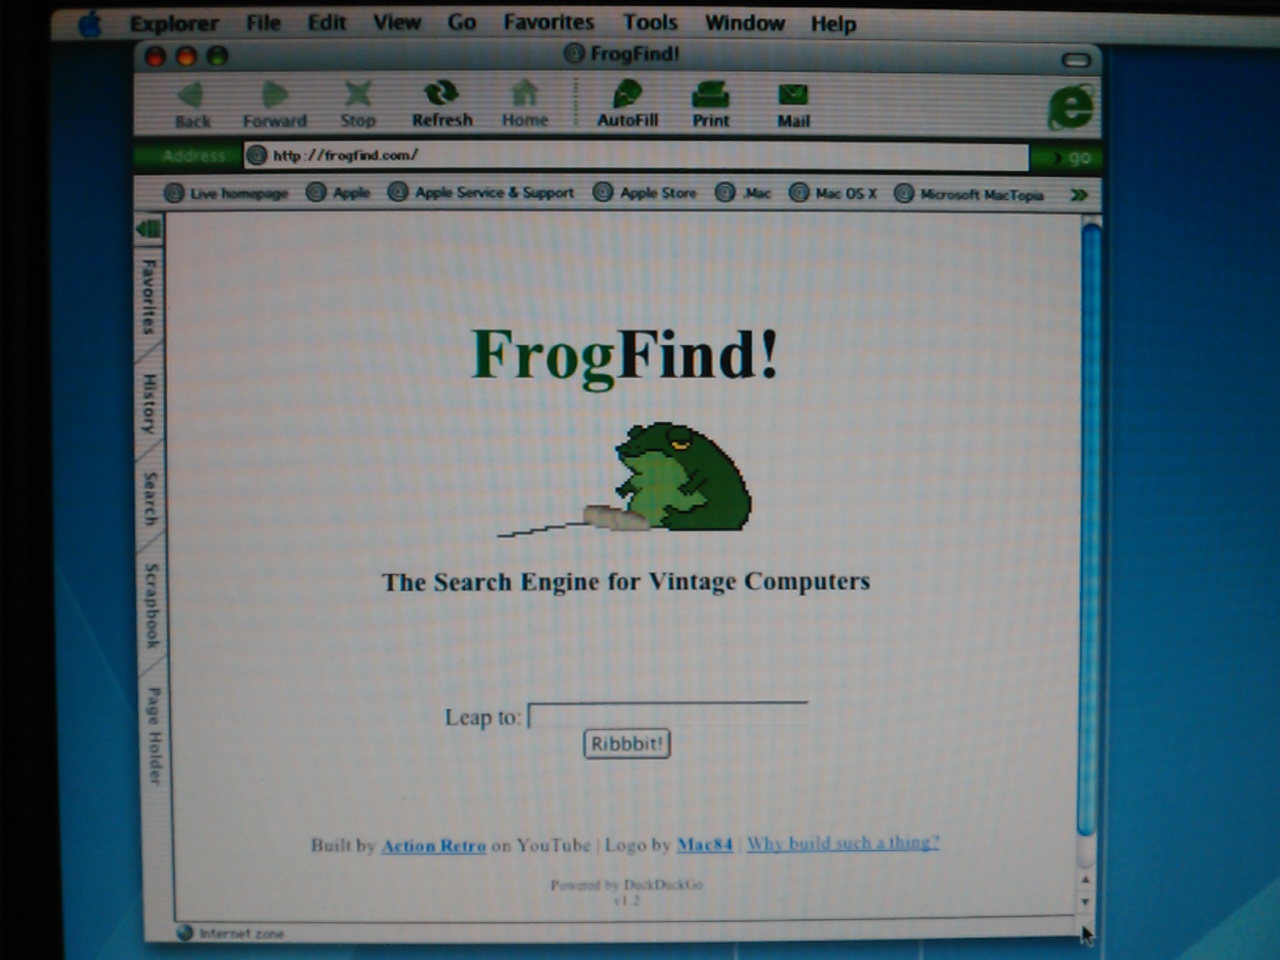 Internet Explorer with green theme showing frogfind